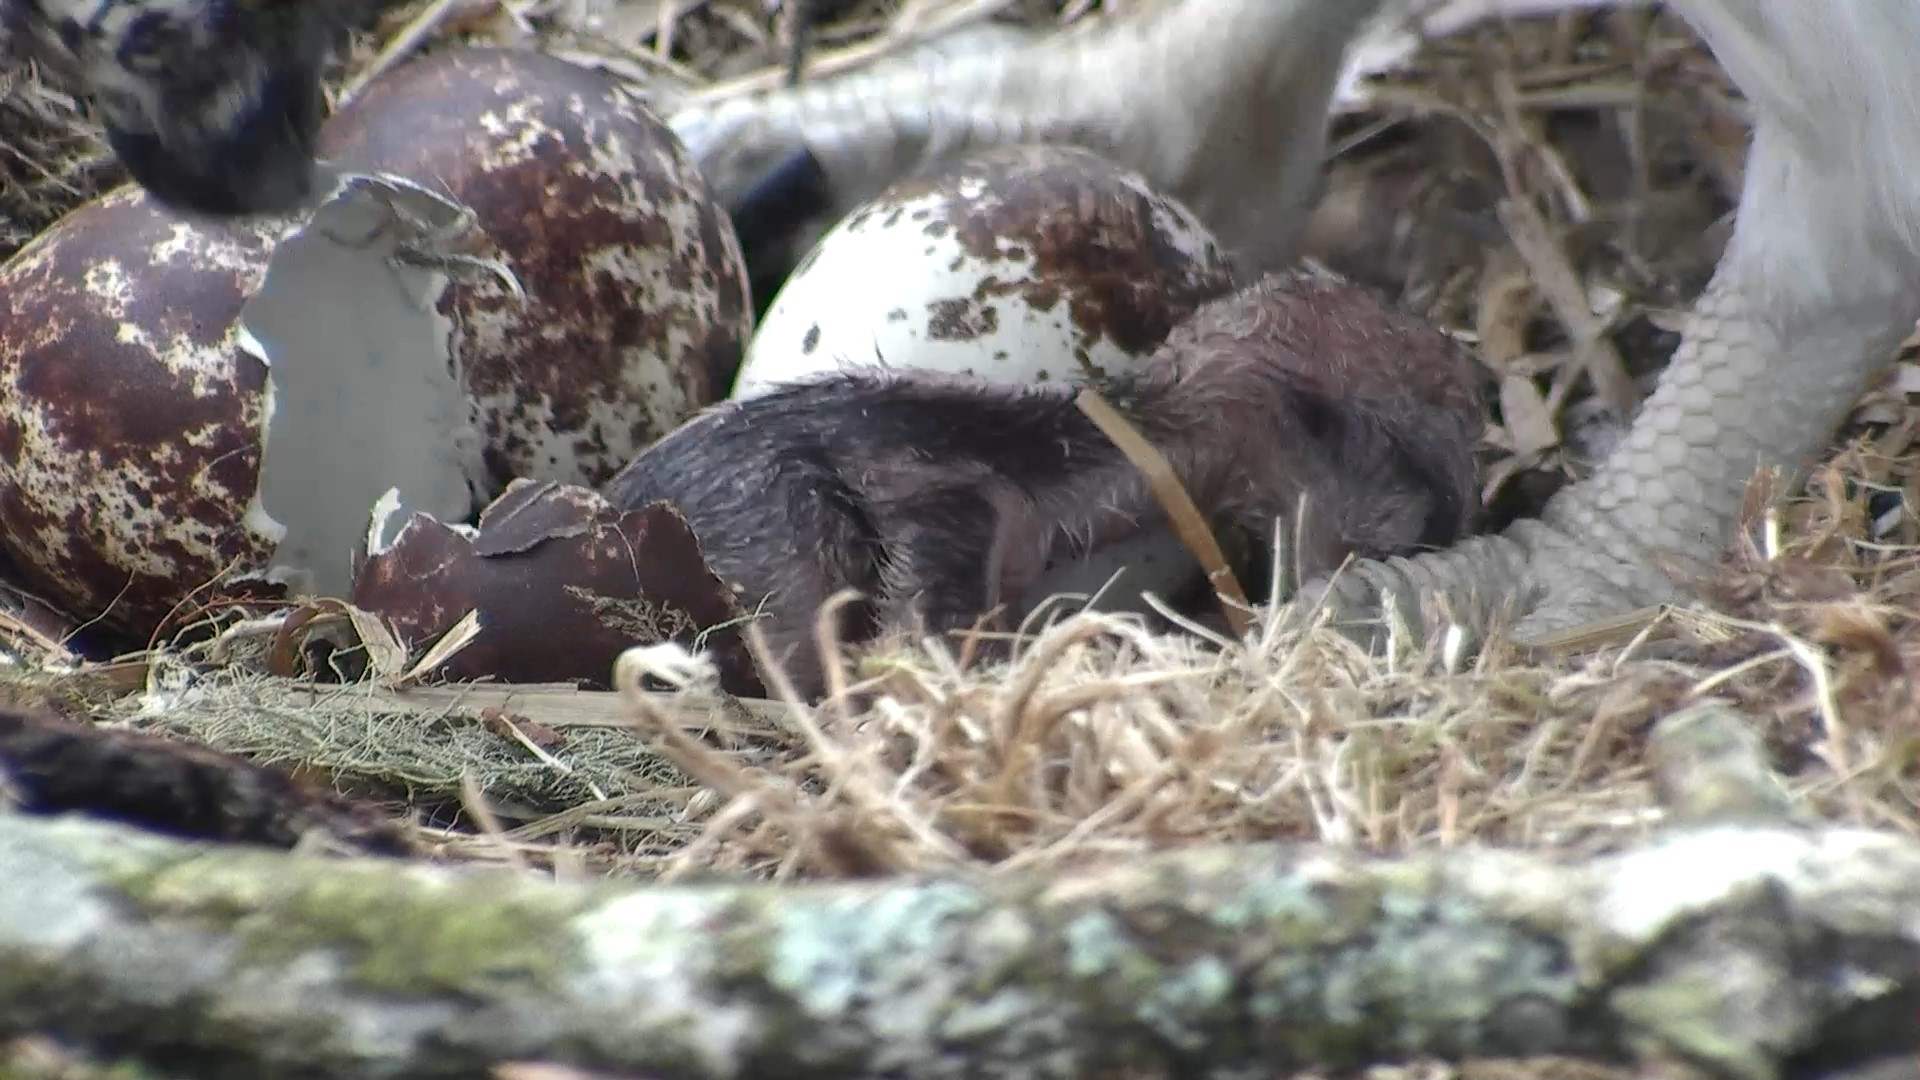 The osprey chick hatched at 3.18pm